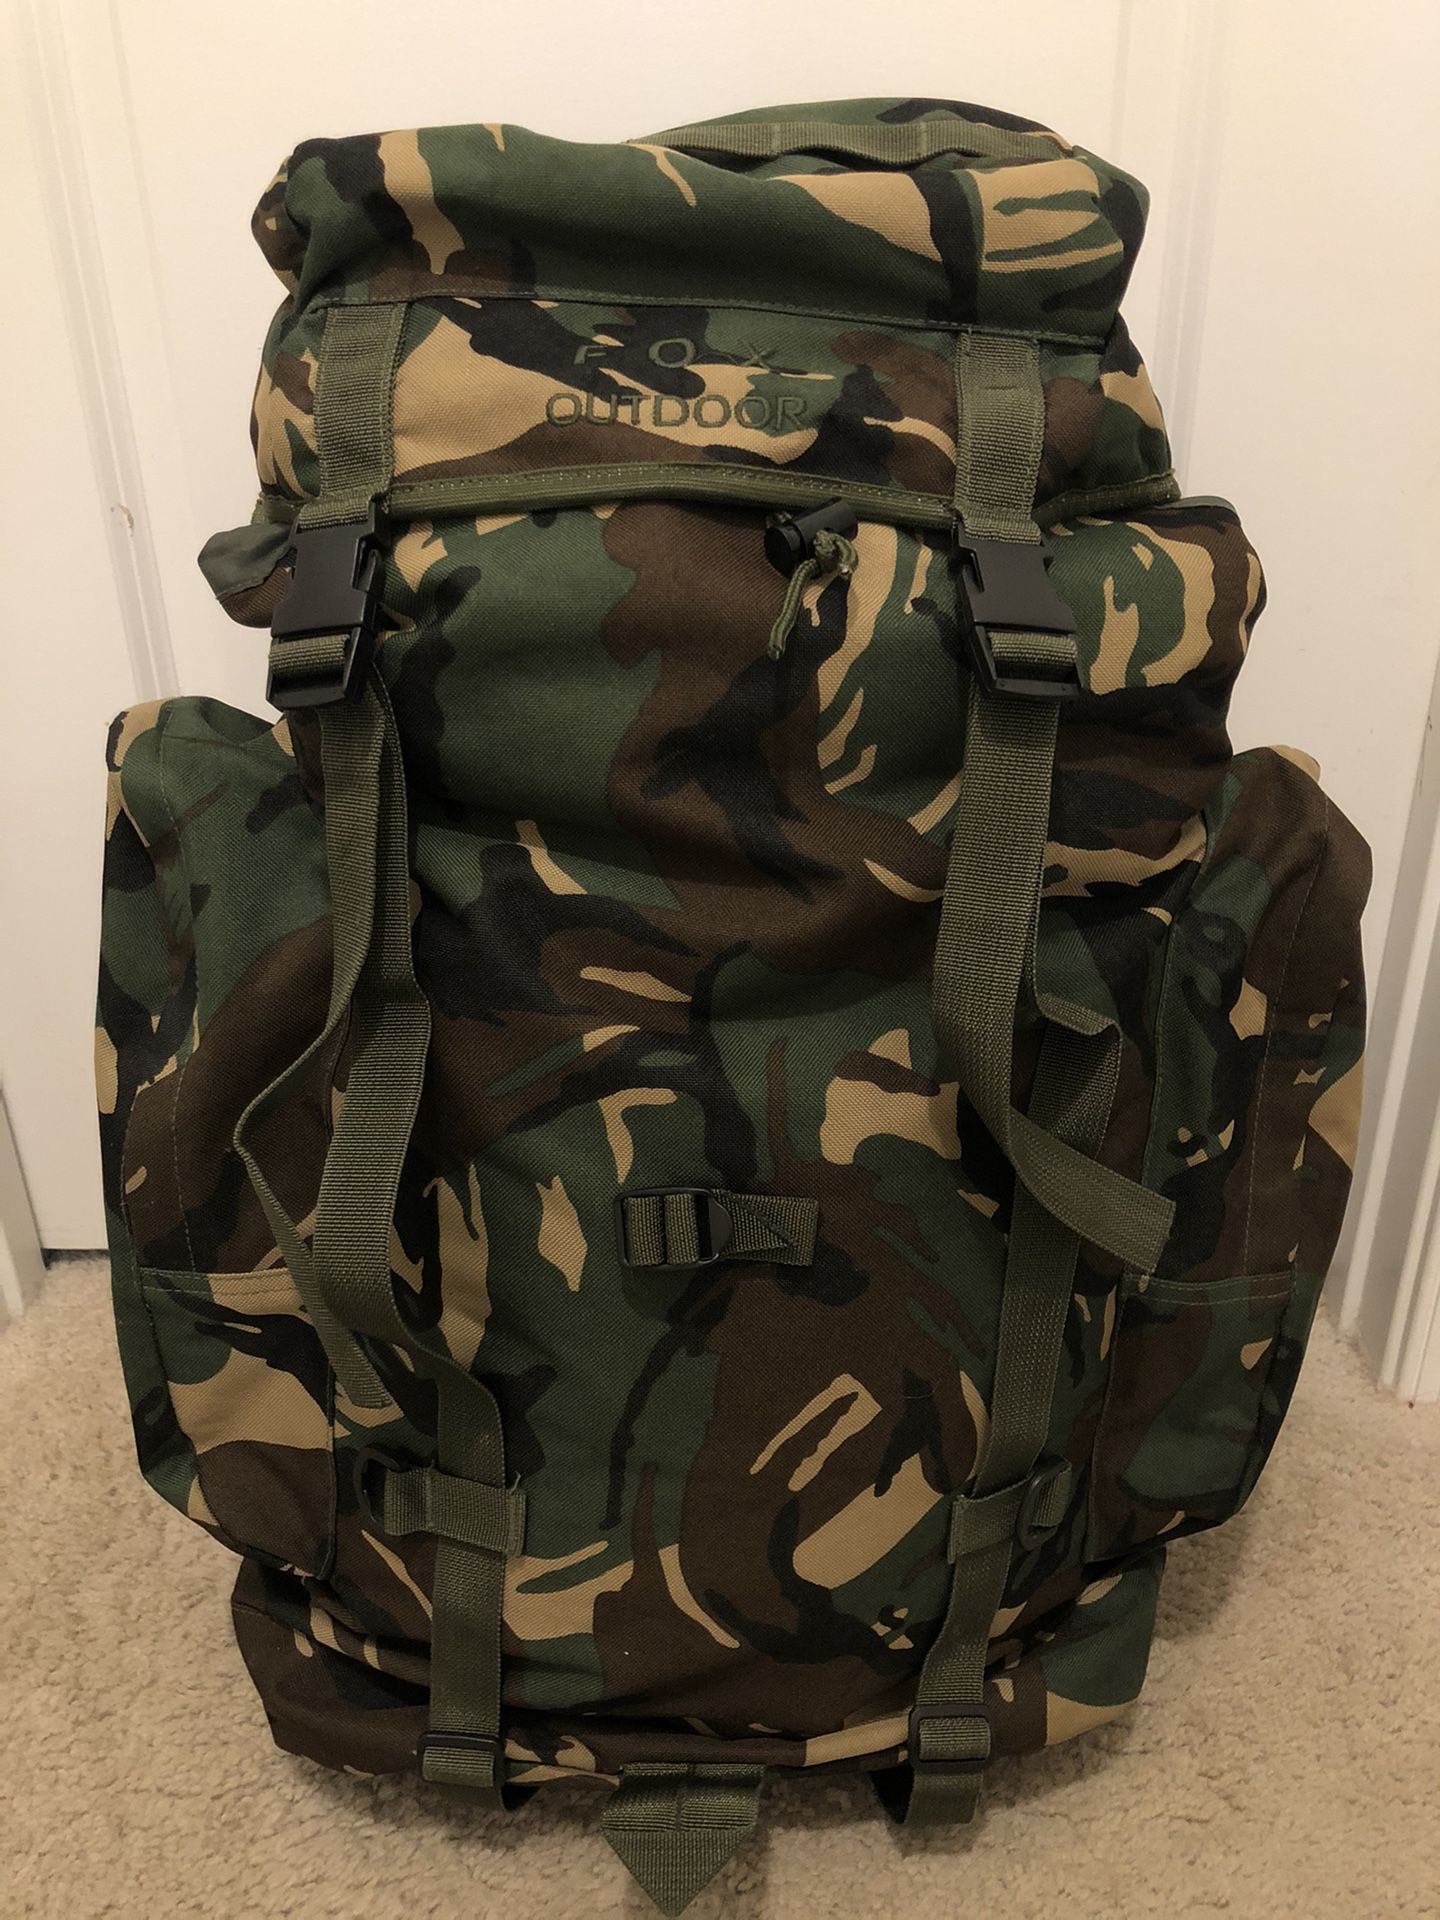 Look LEGIT with this LIKE NEW 75L FOX OUTDOORS CAMO BACKPACK!